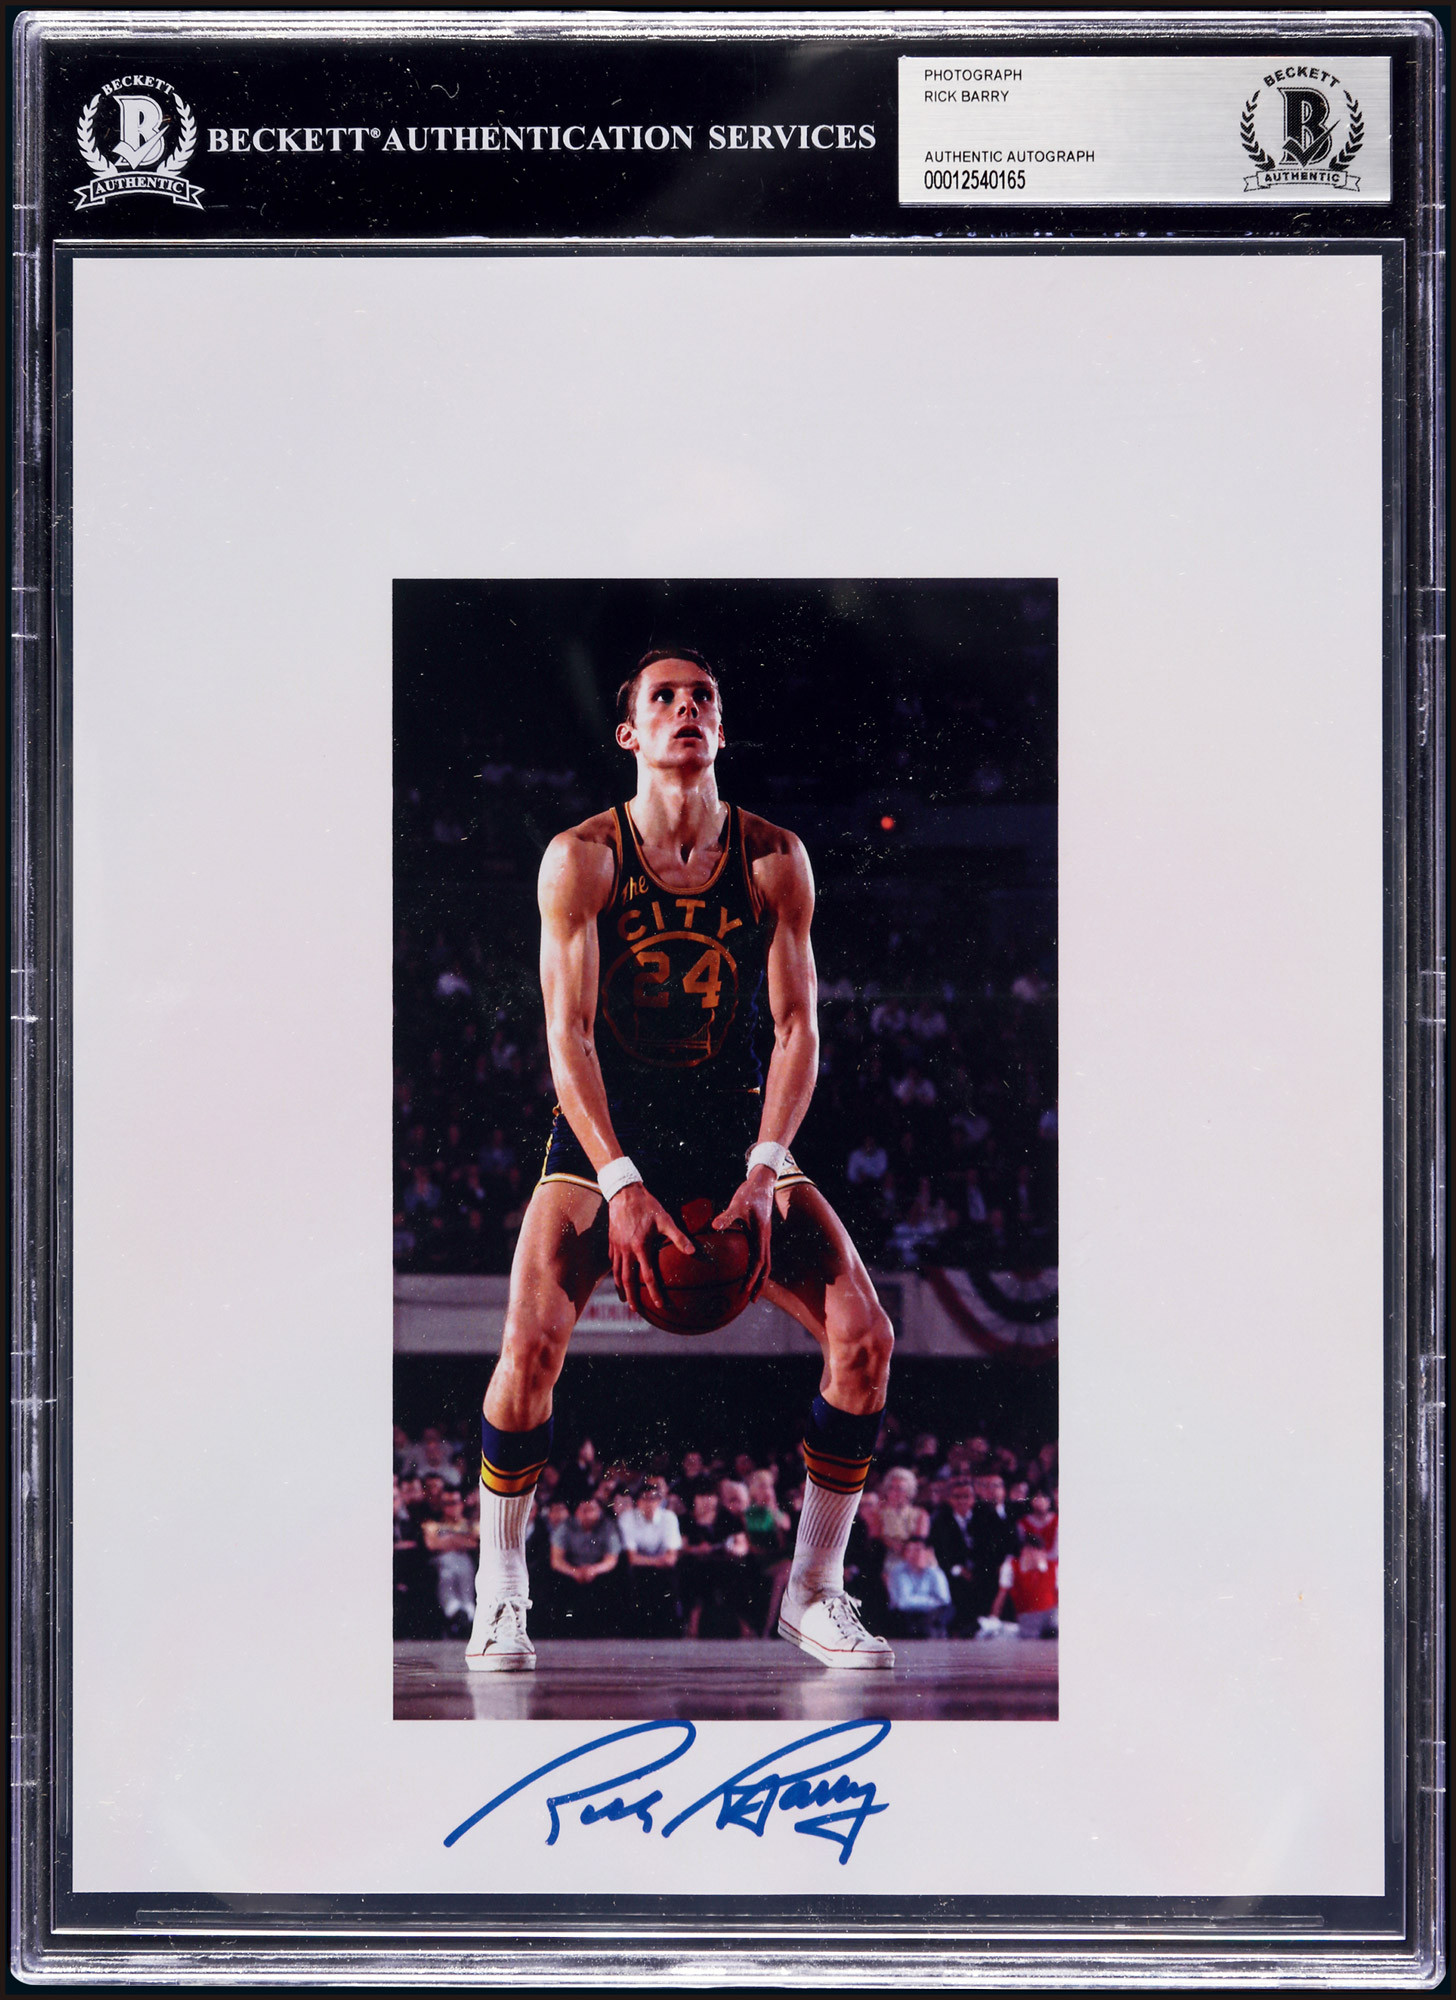 The autographed photo of Rick Barry, the legendary NBA star